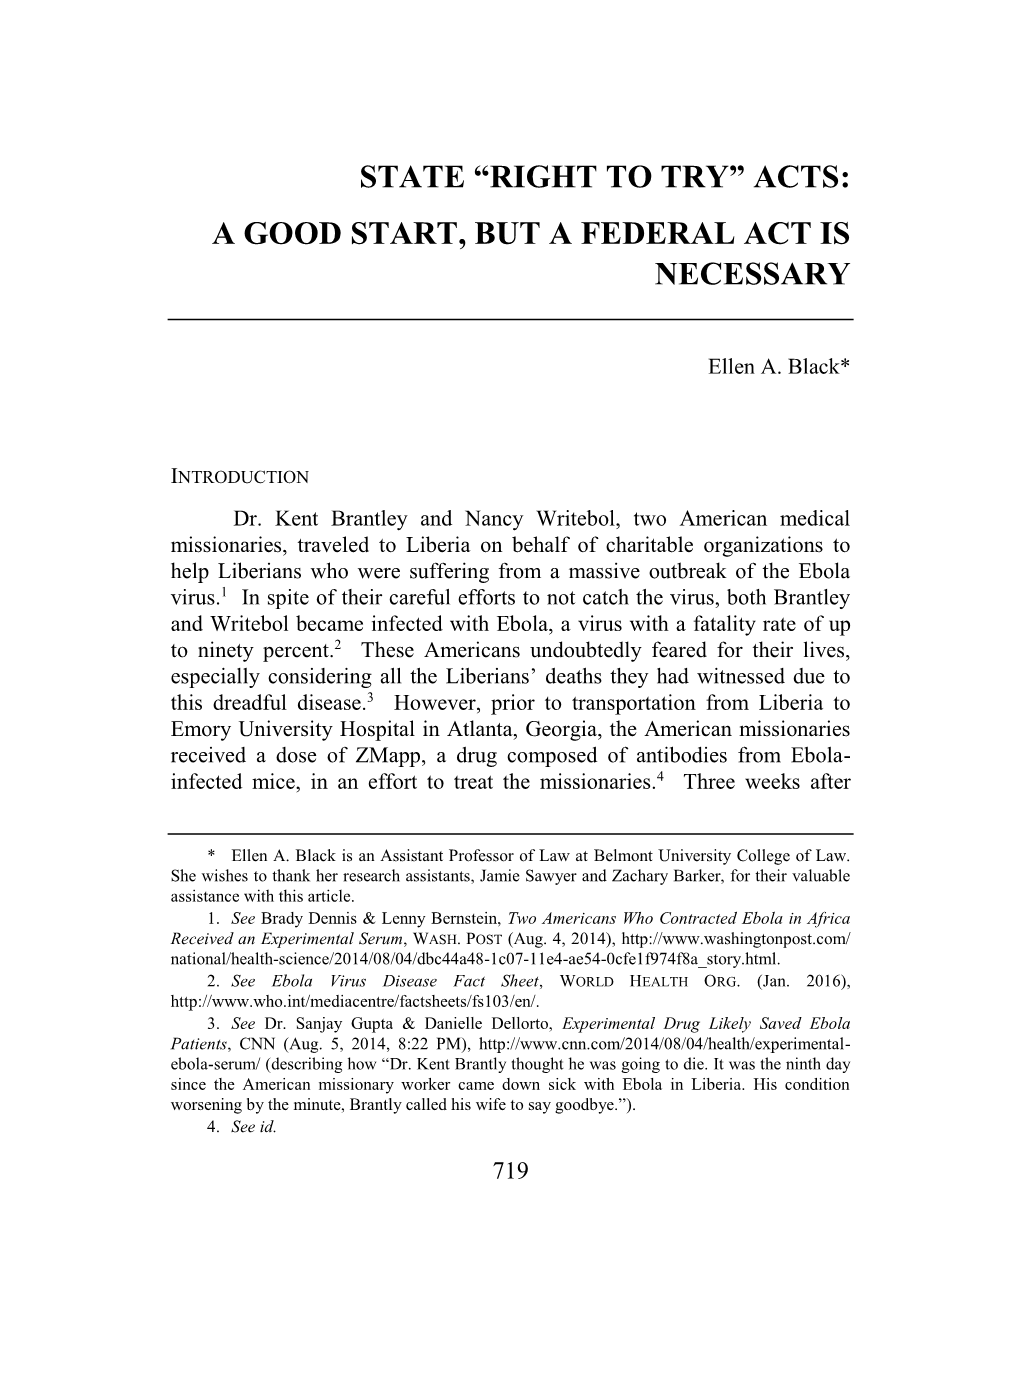 State “Right to Try” Acts: a Good Start, but a Federal Act Is Necessary